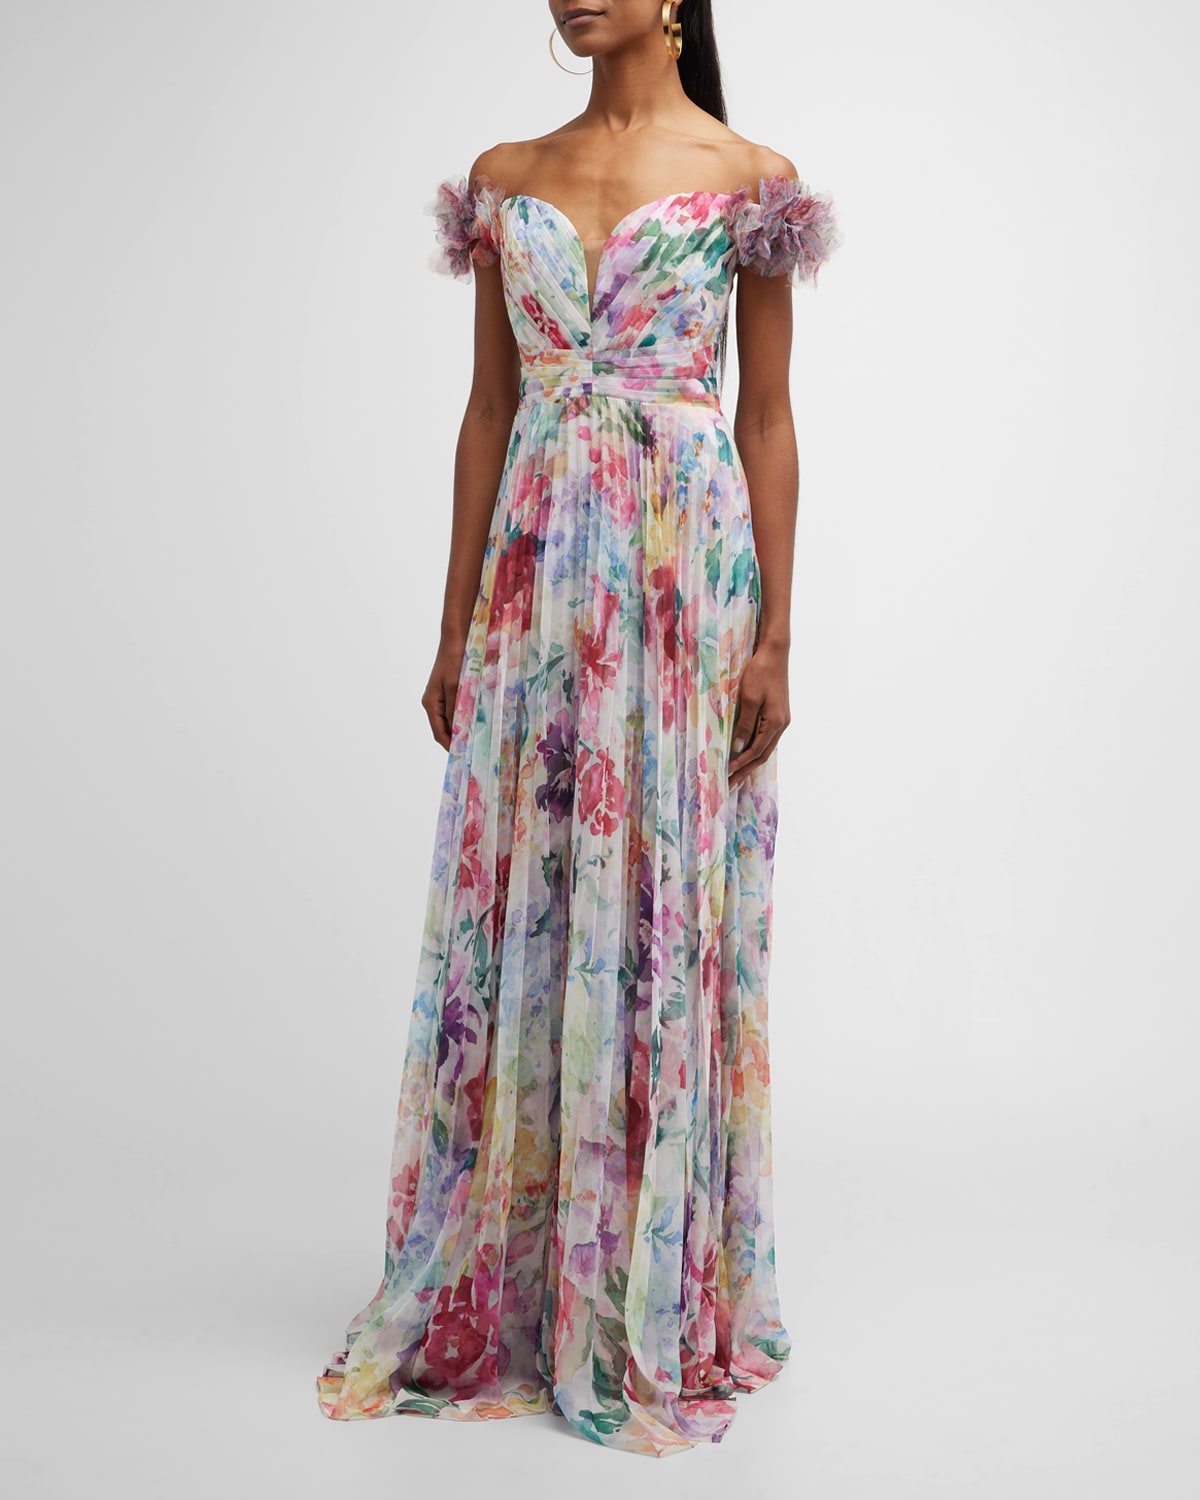 Halston Mindy Pleated Floral-Print Chiffon Gown | Neiman Marcus